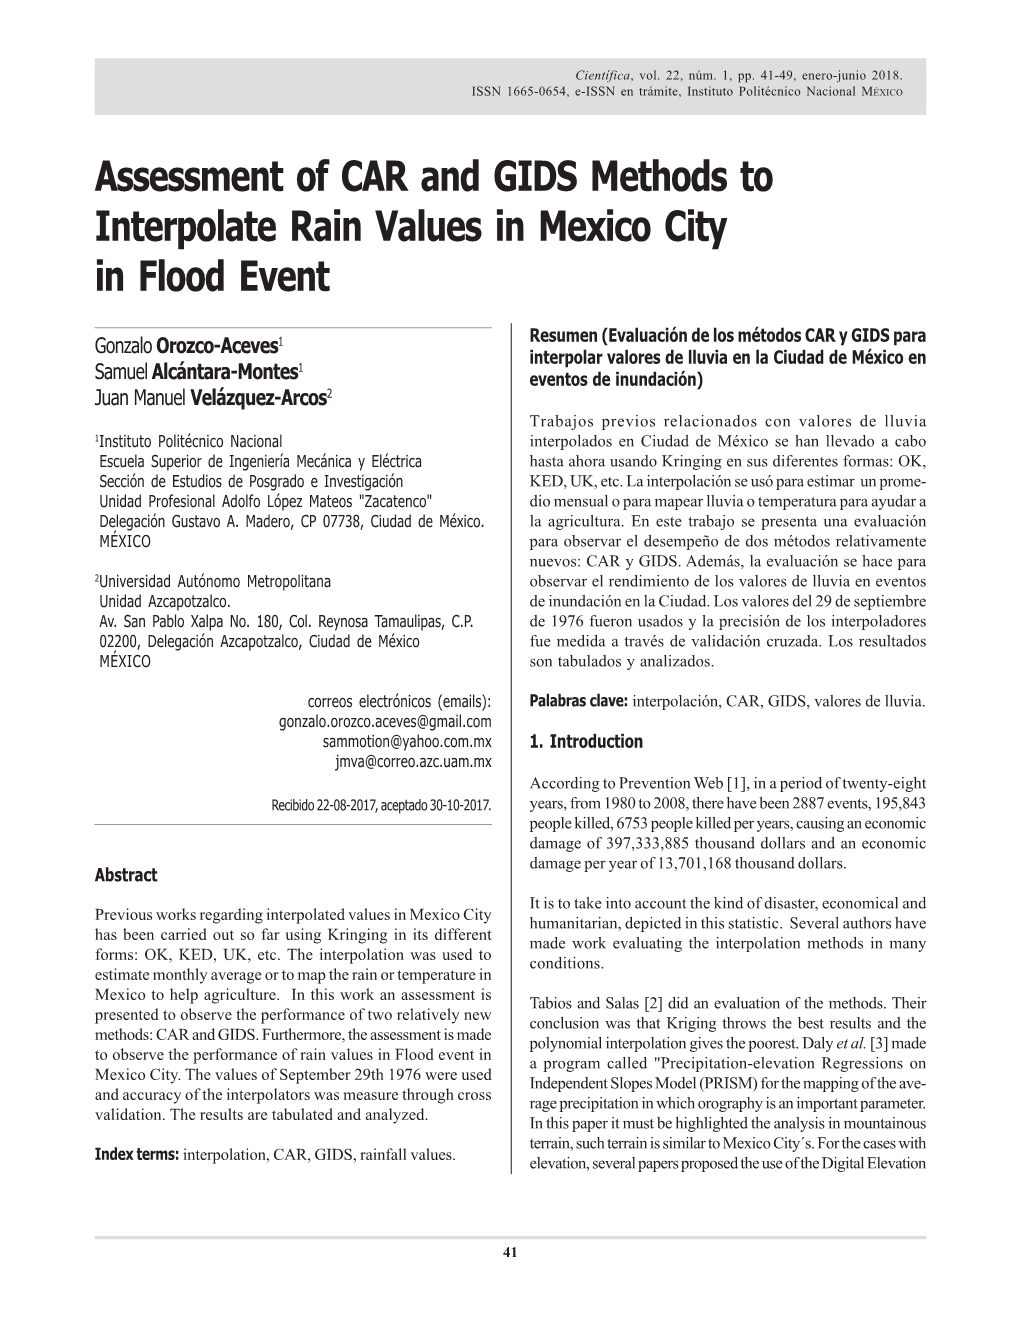 Assessment of CAR and GIDS Methods to Interpolate Rain Values Científica, Vol